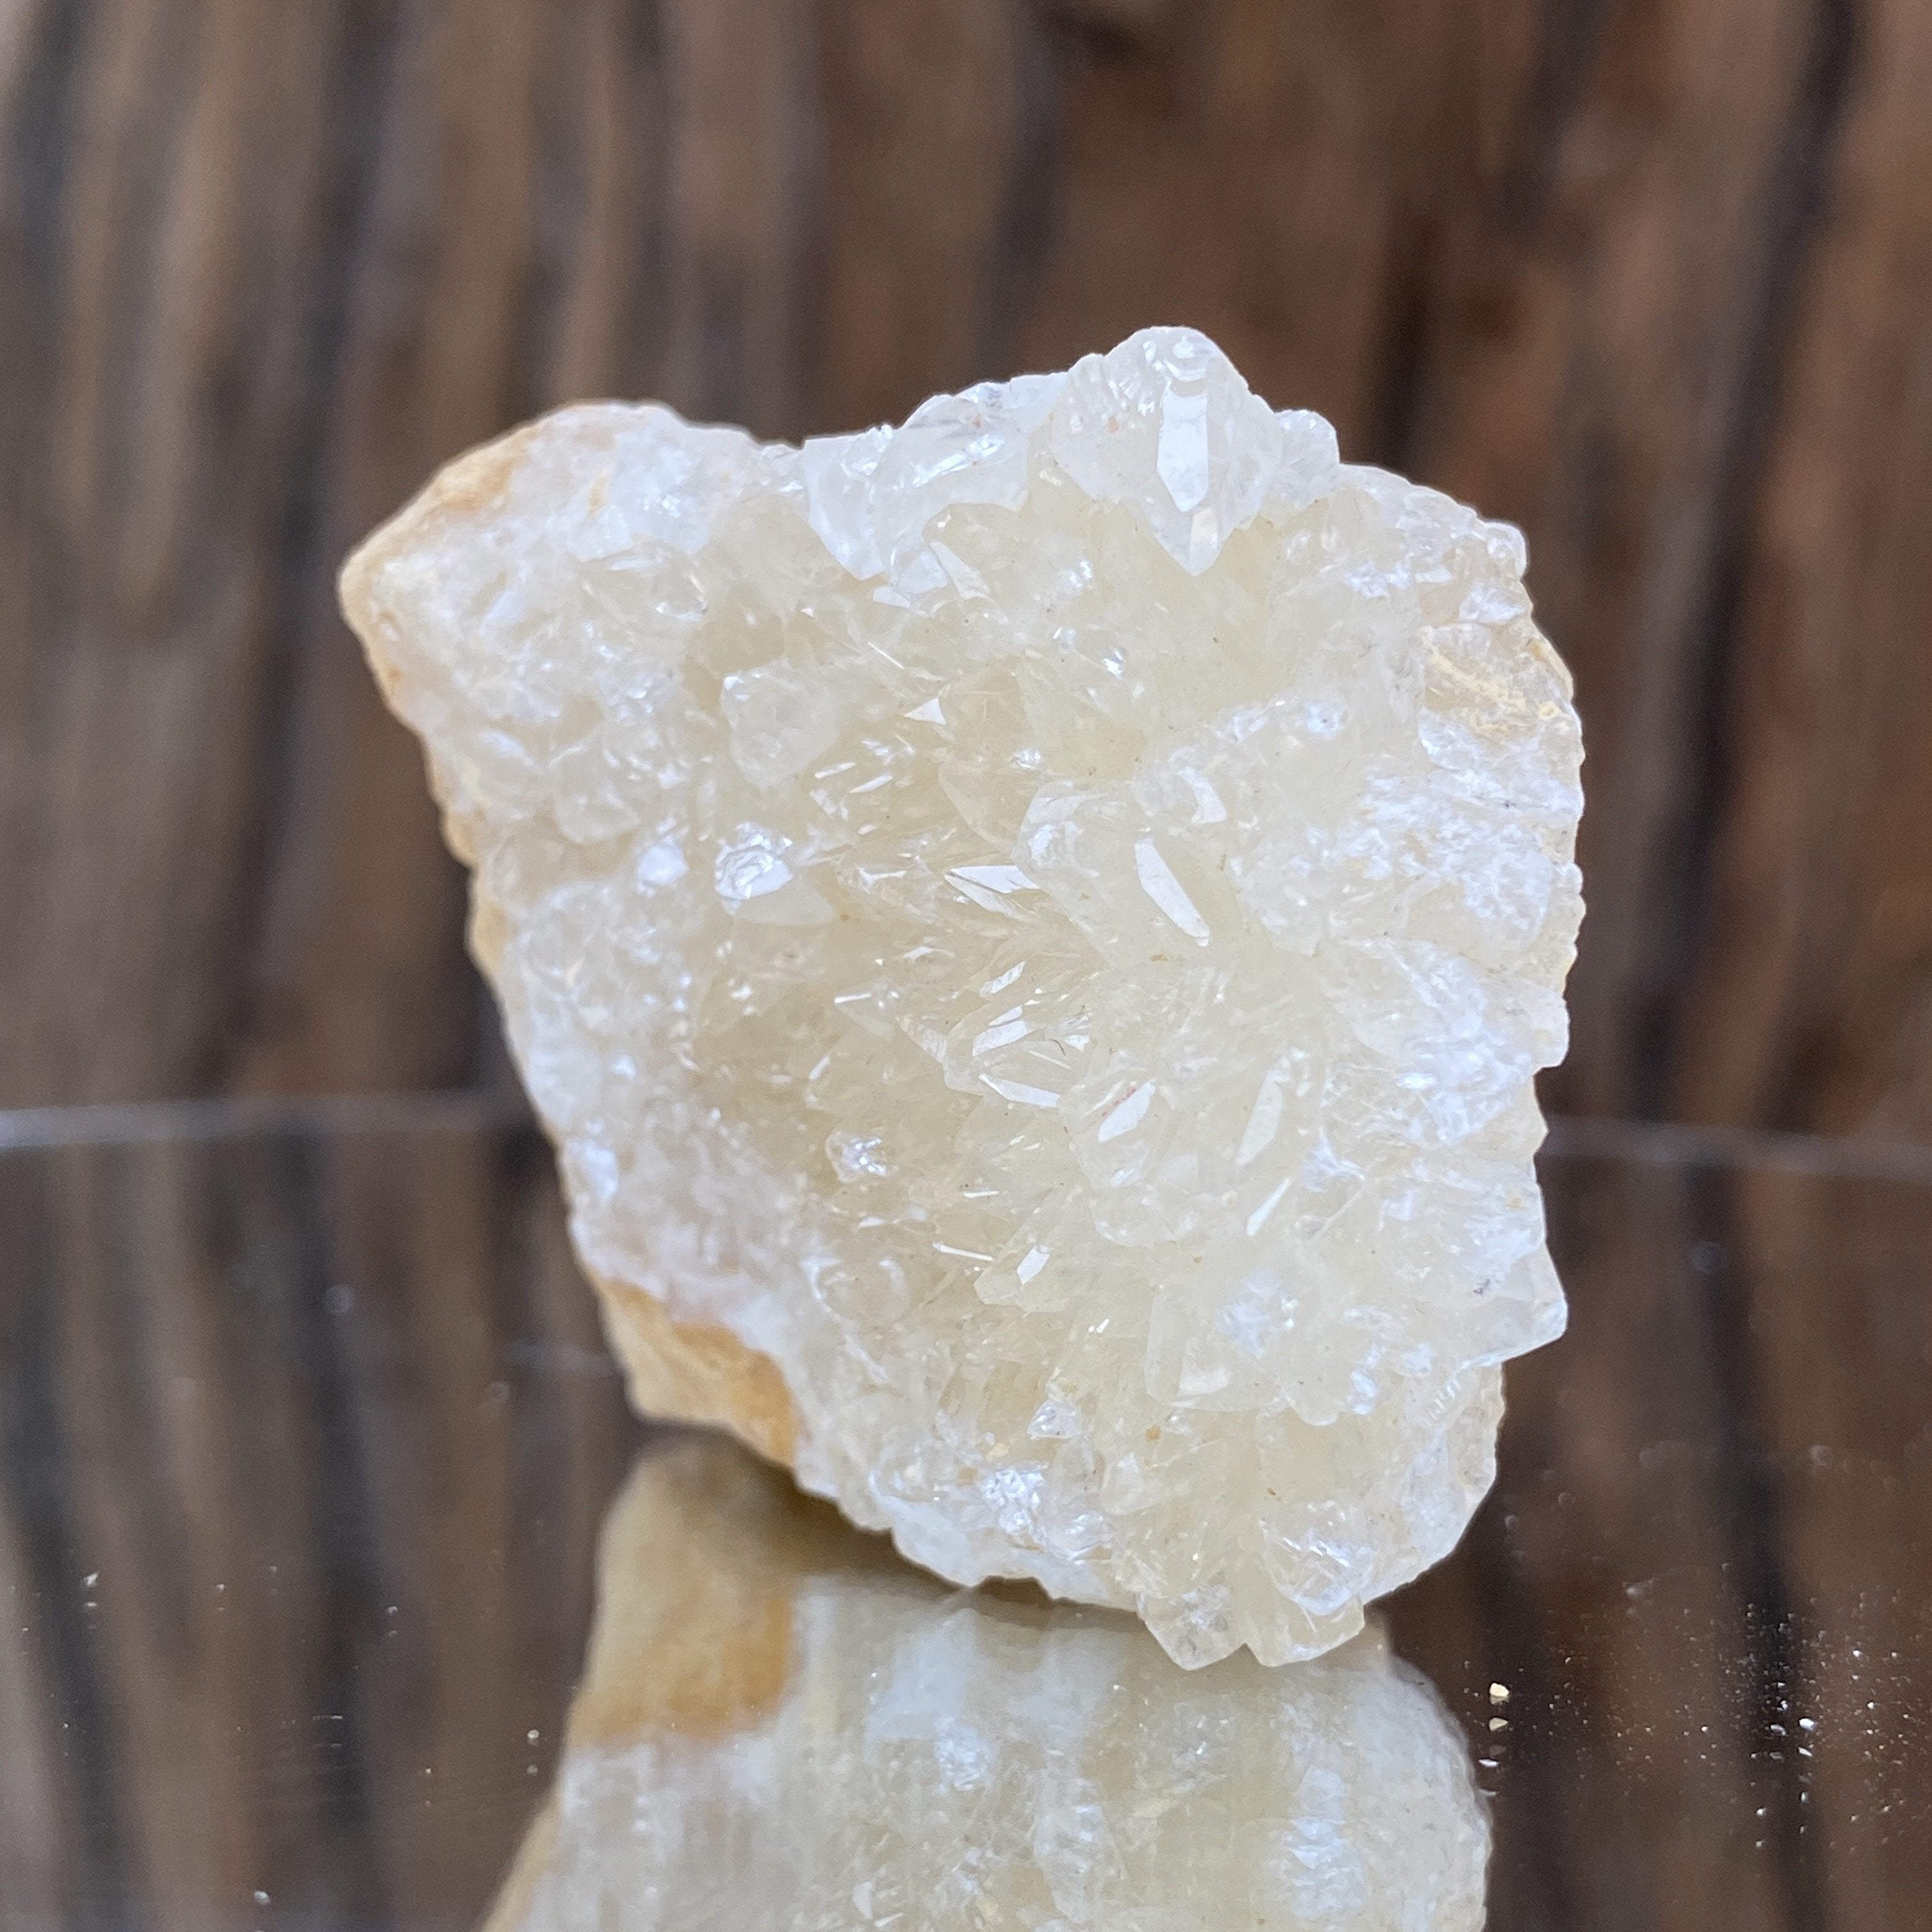 58g 5.5x4x4cm Clear Calcite Geode from Morocco - Locco Decor